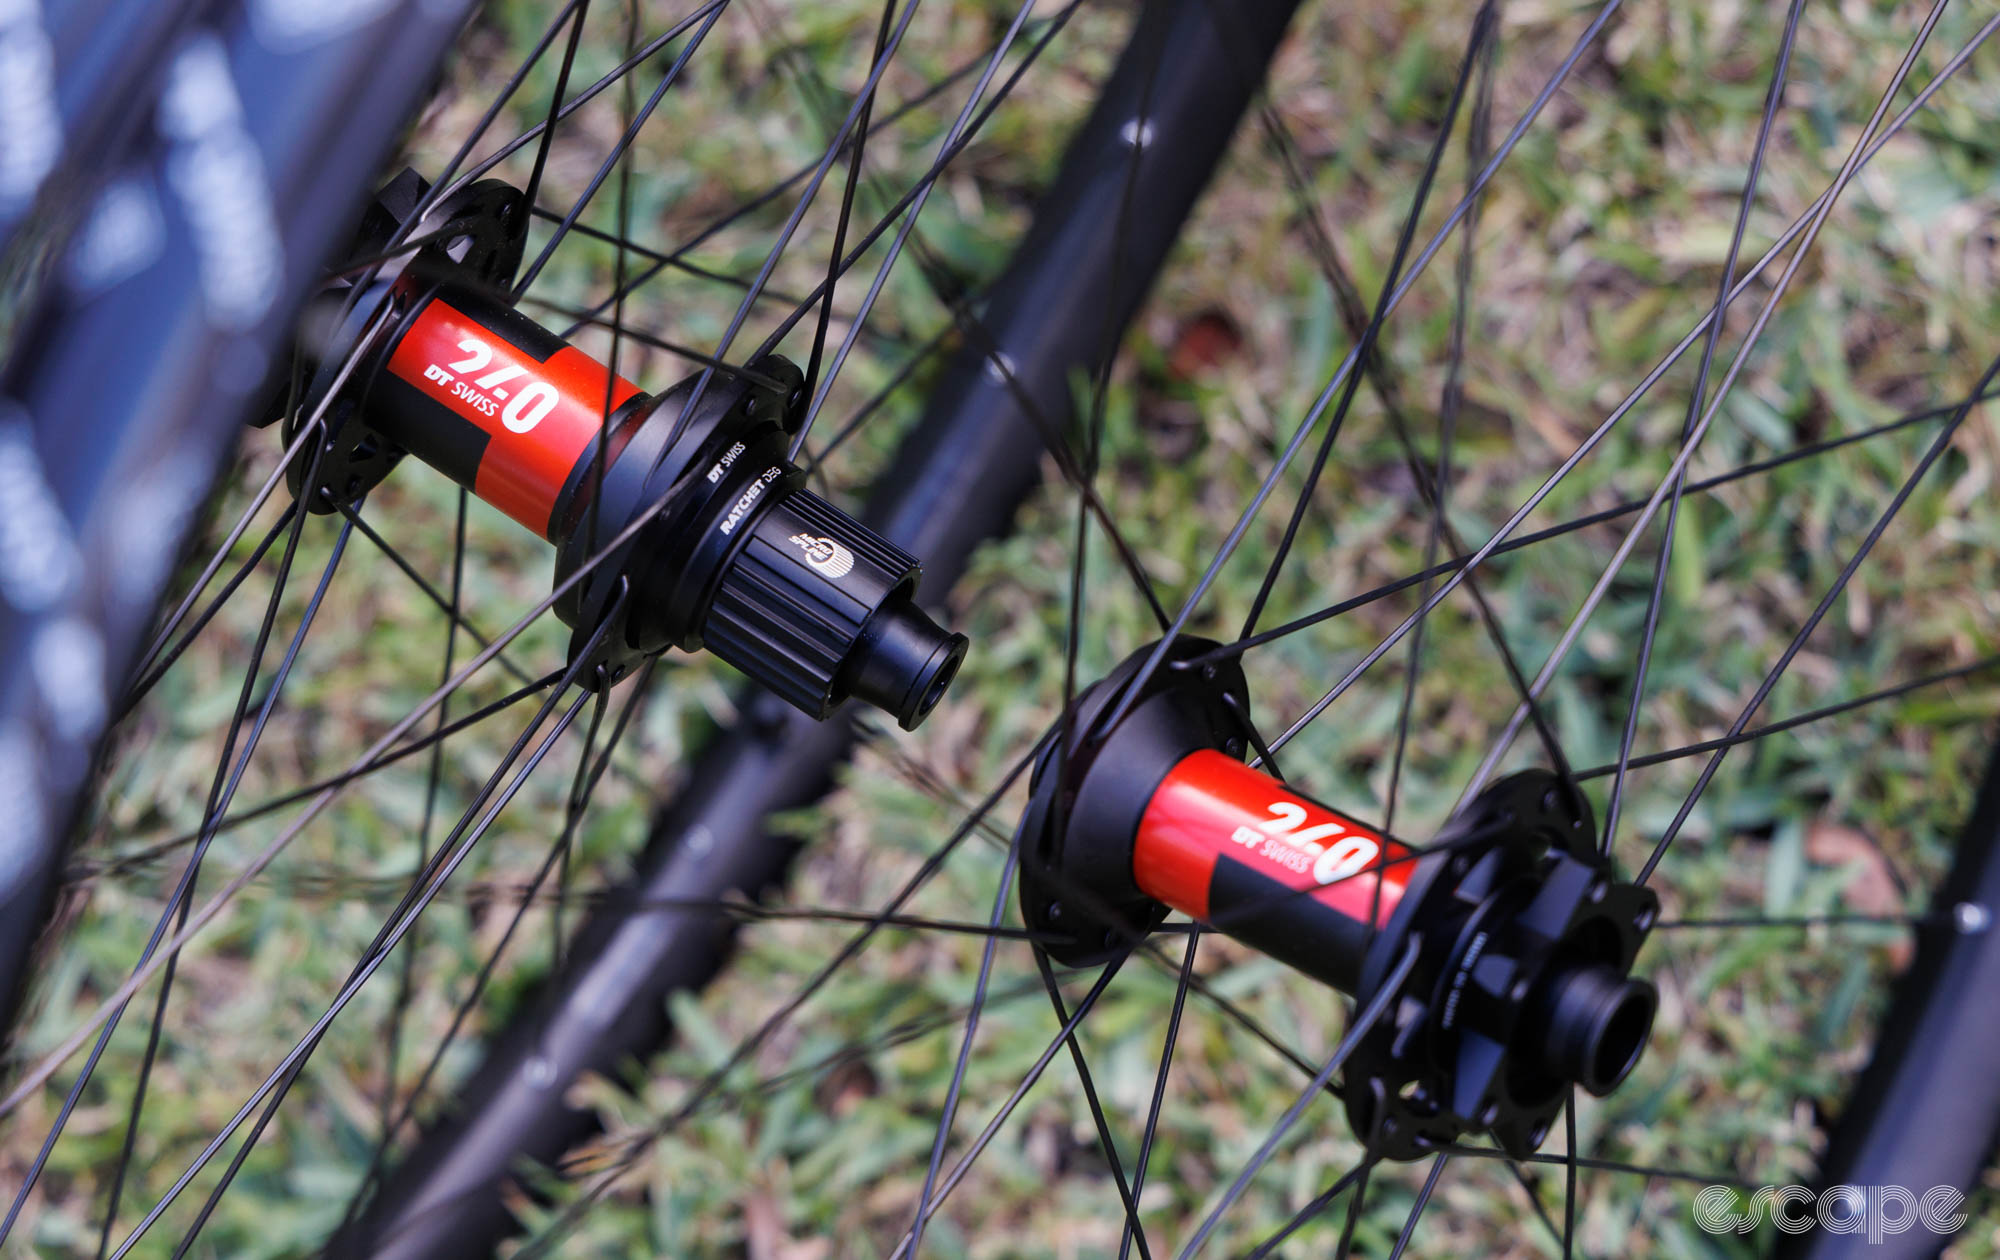 A pair of new DT Swiss 240 DEG hubs laced into wheels on a grass background. 